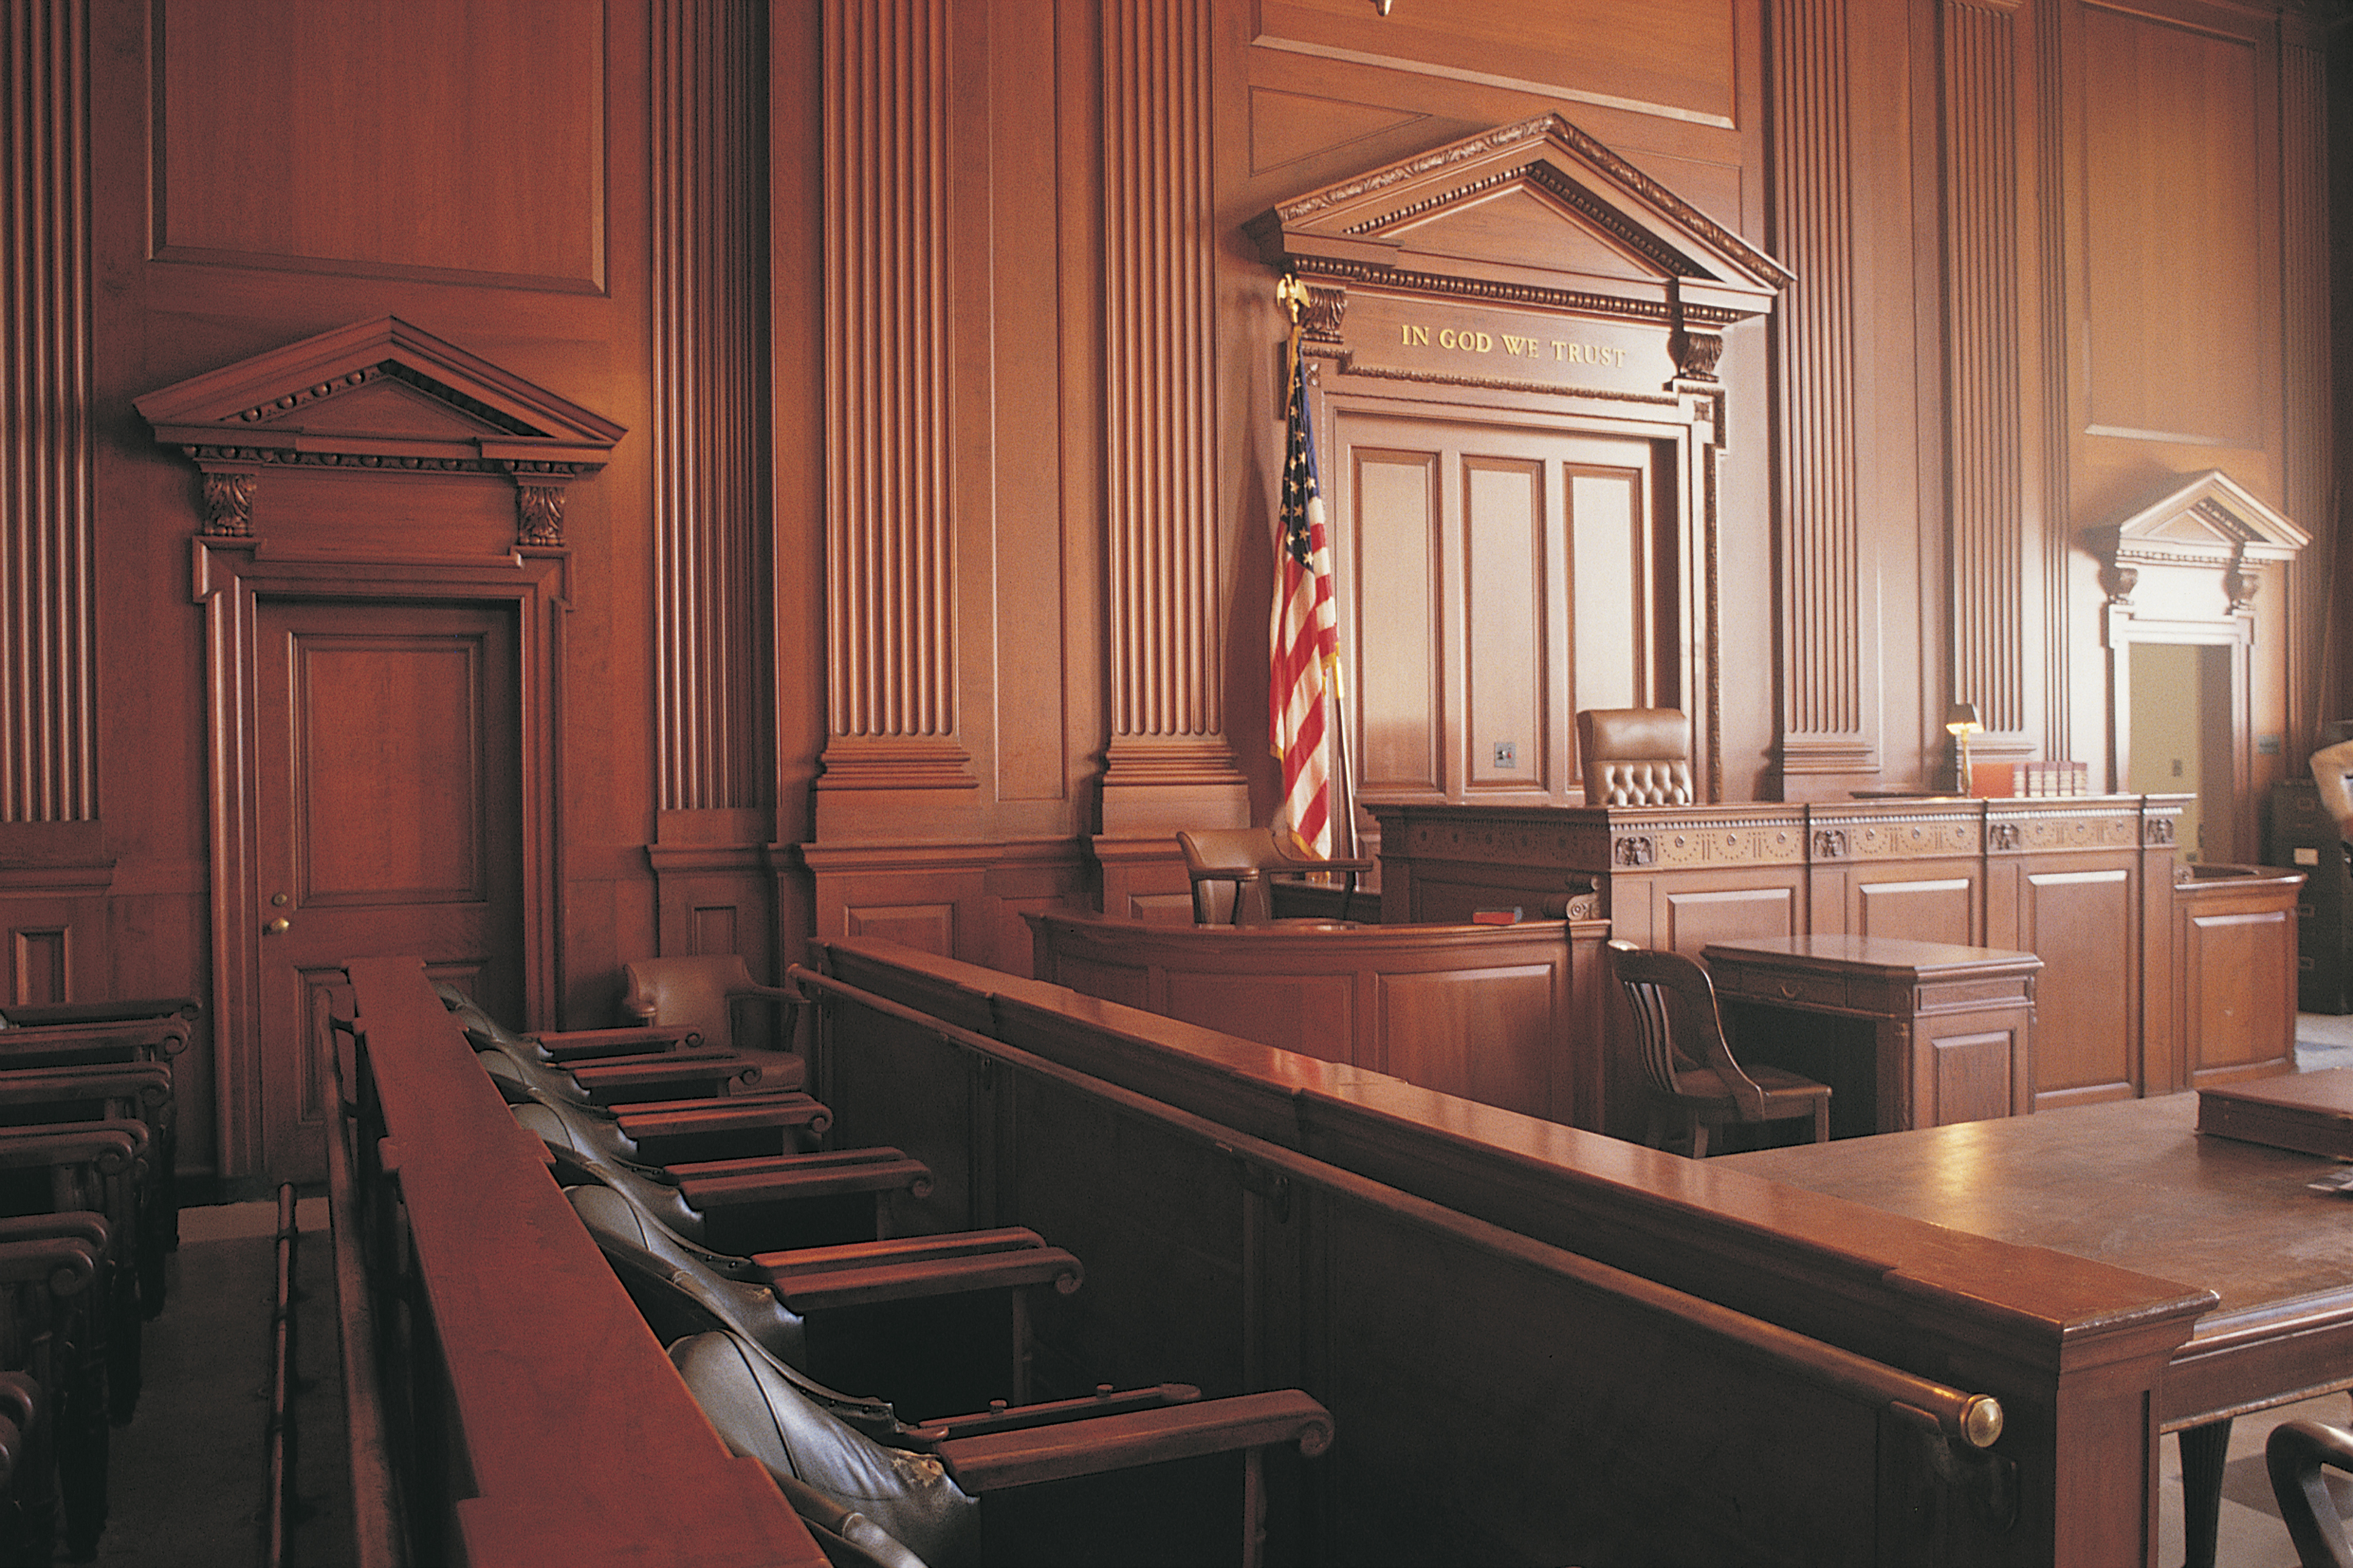 A photo of the dais in an empty courtroom, from the perspective of the jurors box